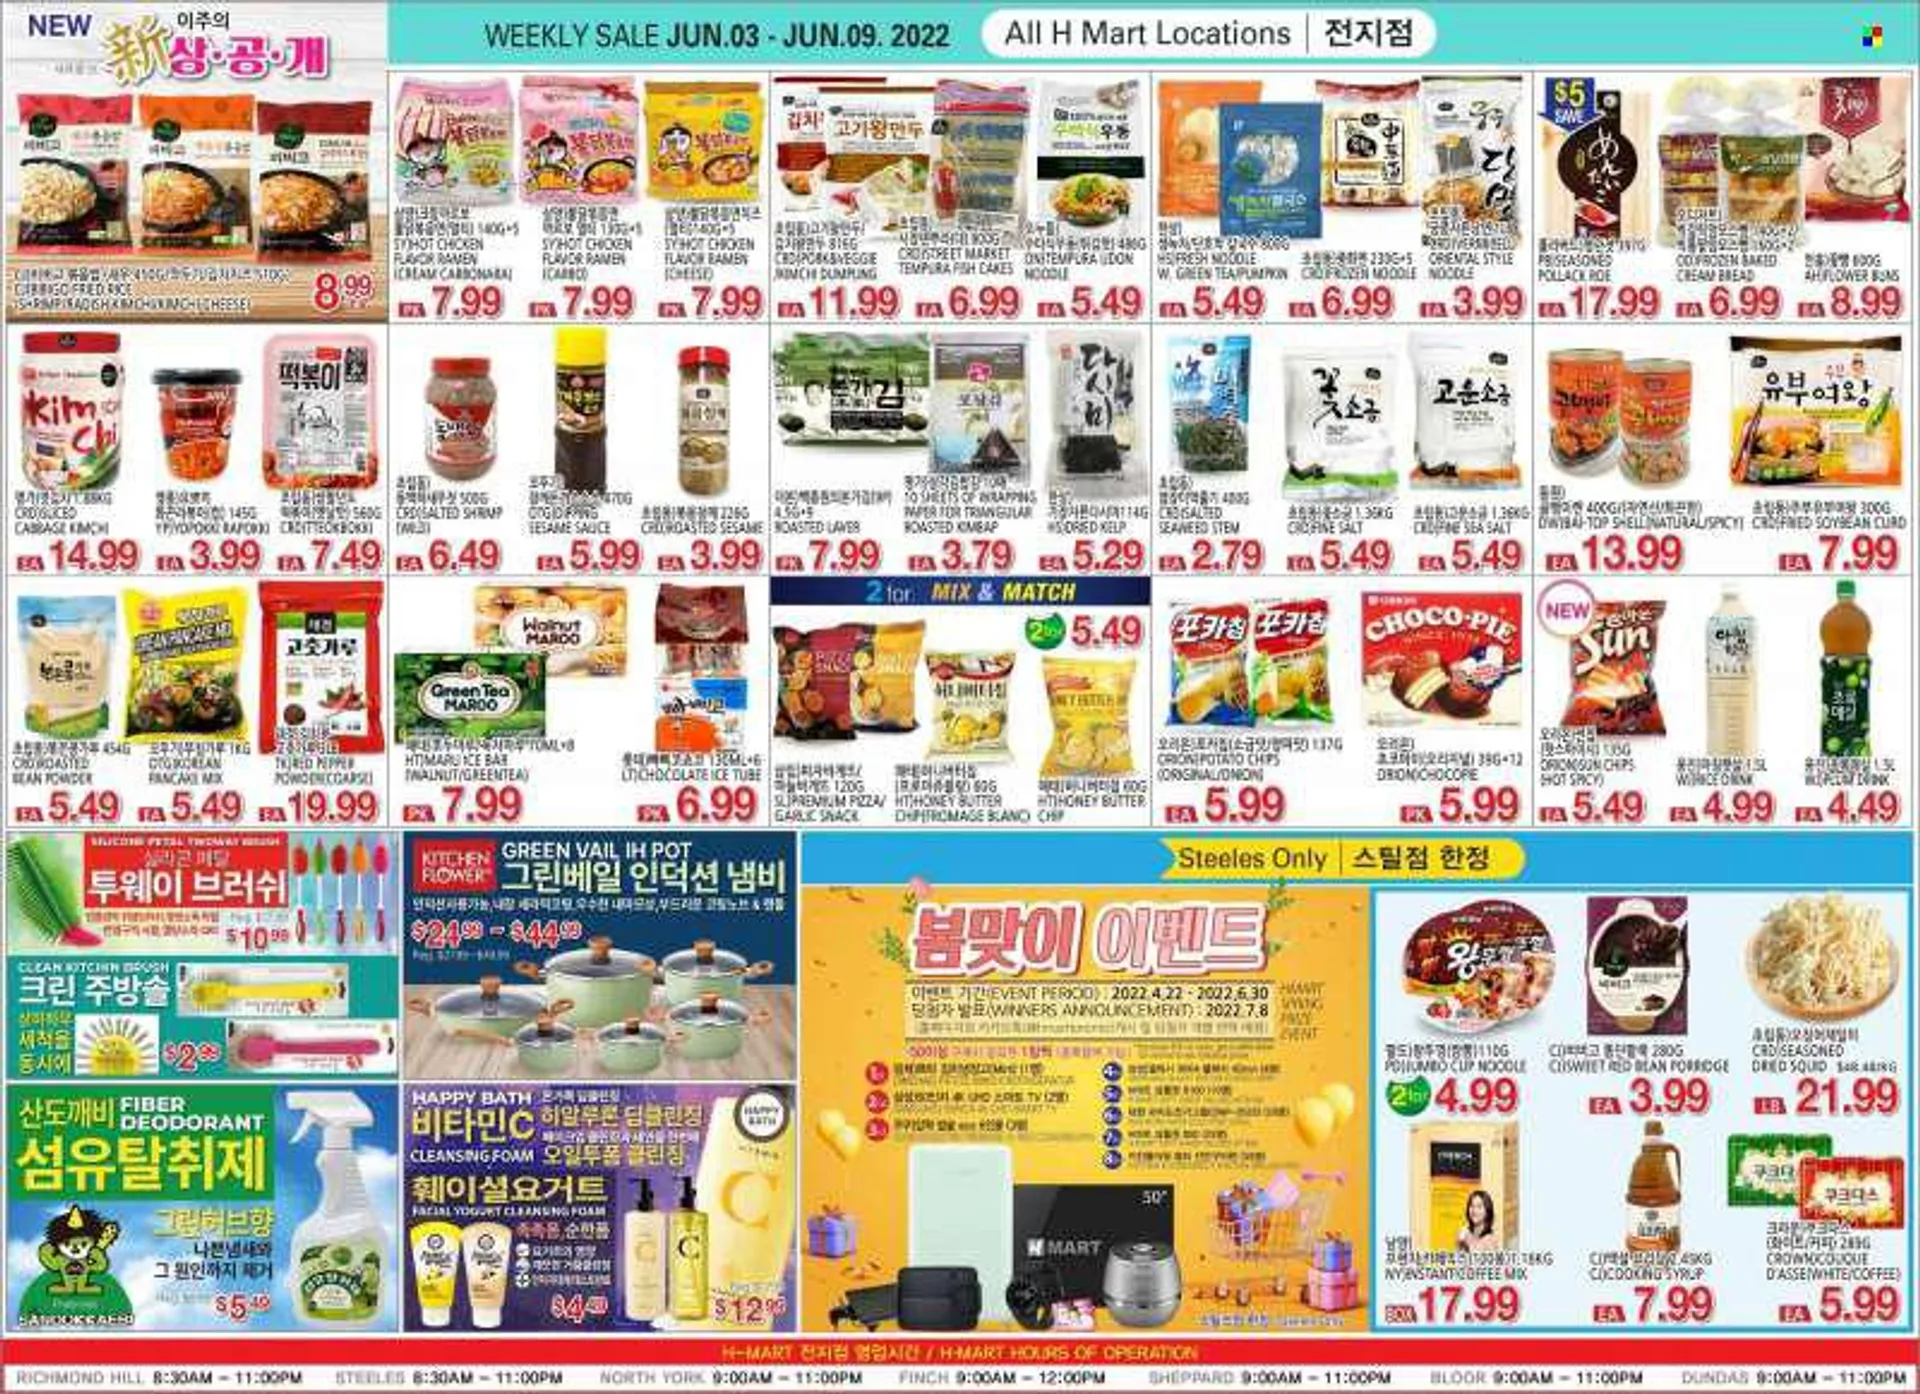 H Mart Flyer - June 03, 2022 - June 09, 2022. from June 3 to June 9 2022 - flyer page 2